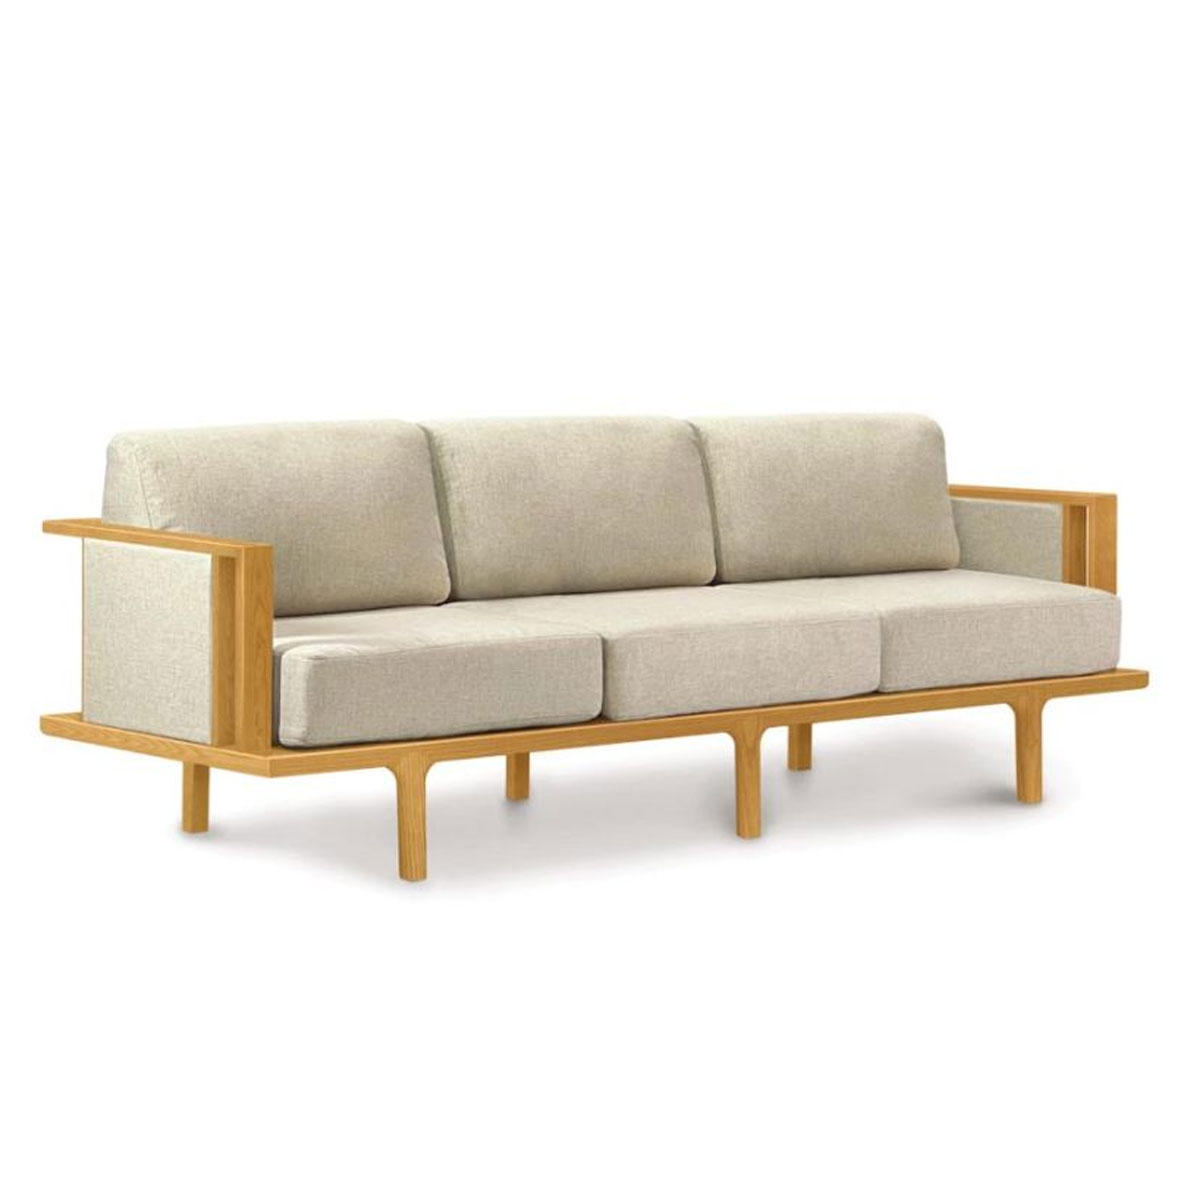 Copeland Sierra Sofa with Upholstered Panels in Cherry